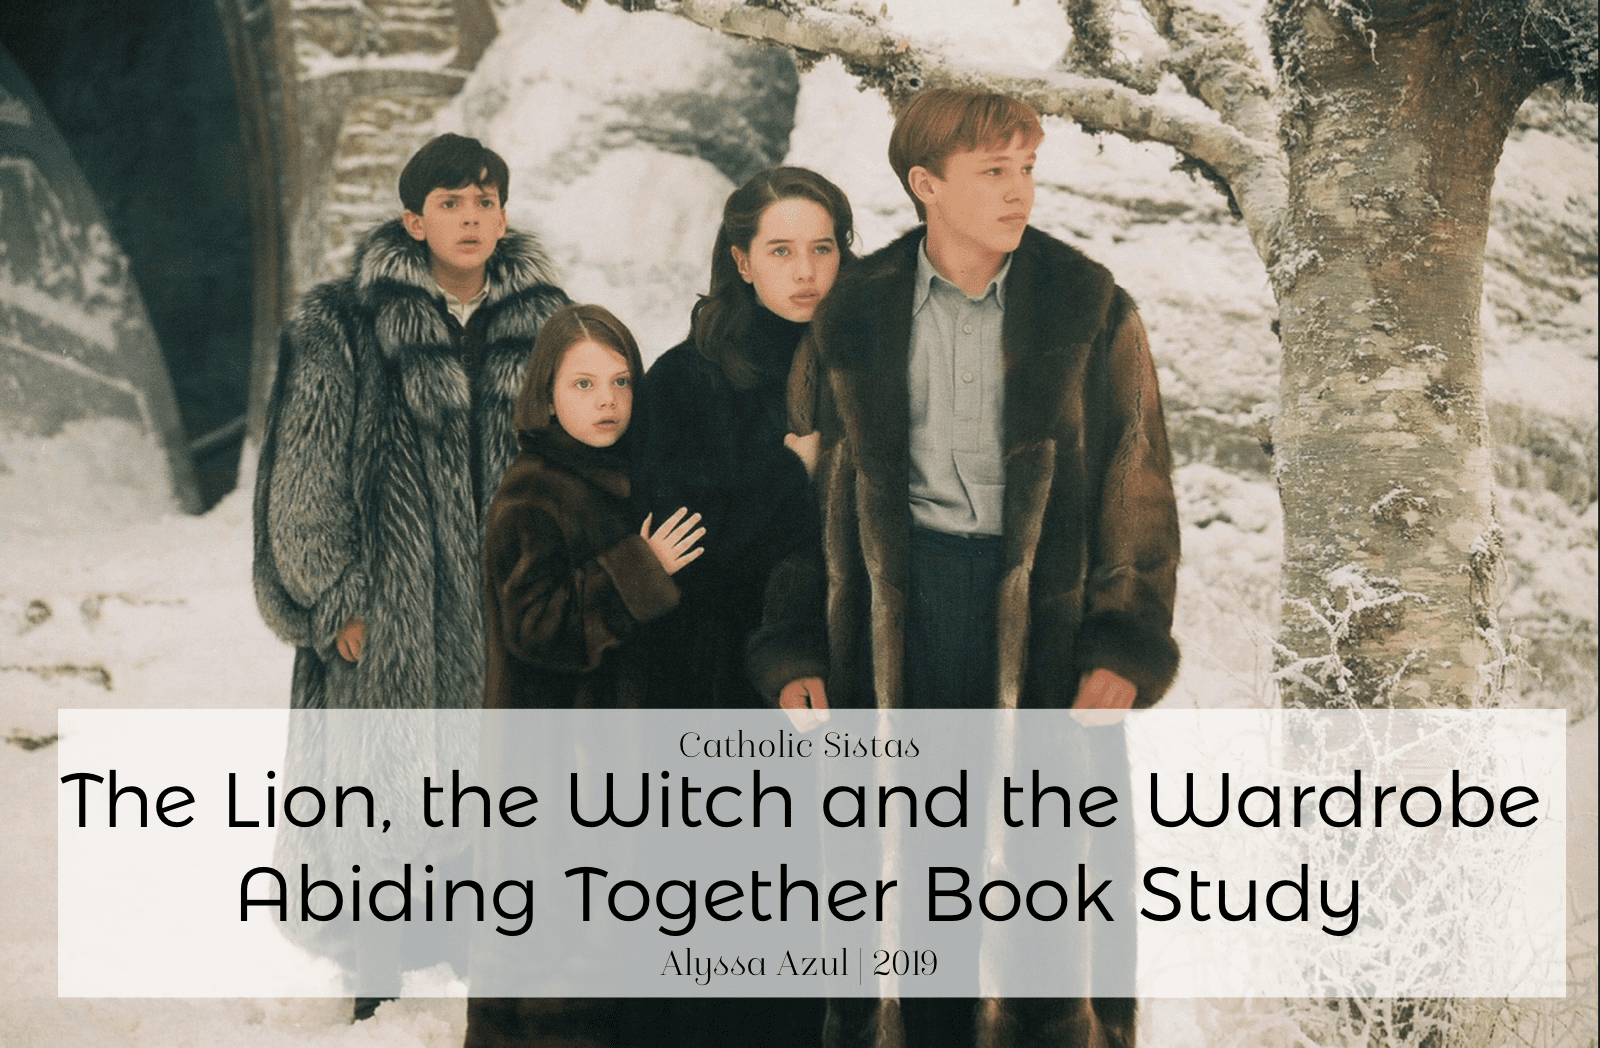 The Lion, the Witch and the Wardrobe: Abiding Together Book Study